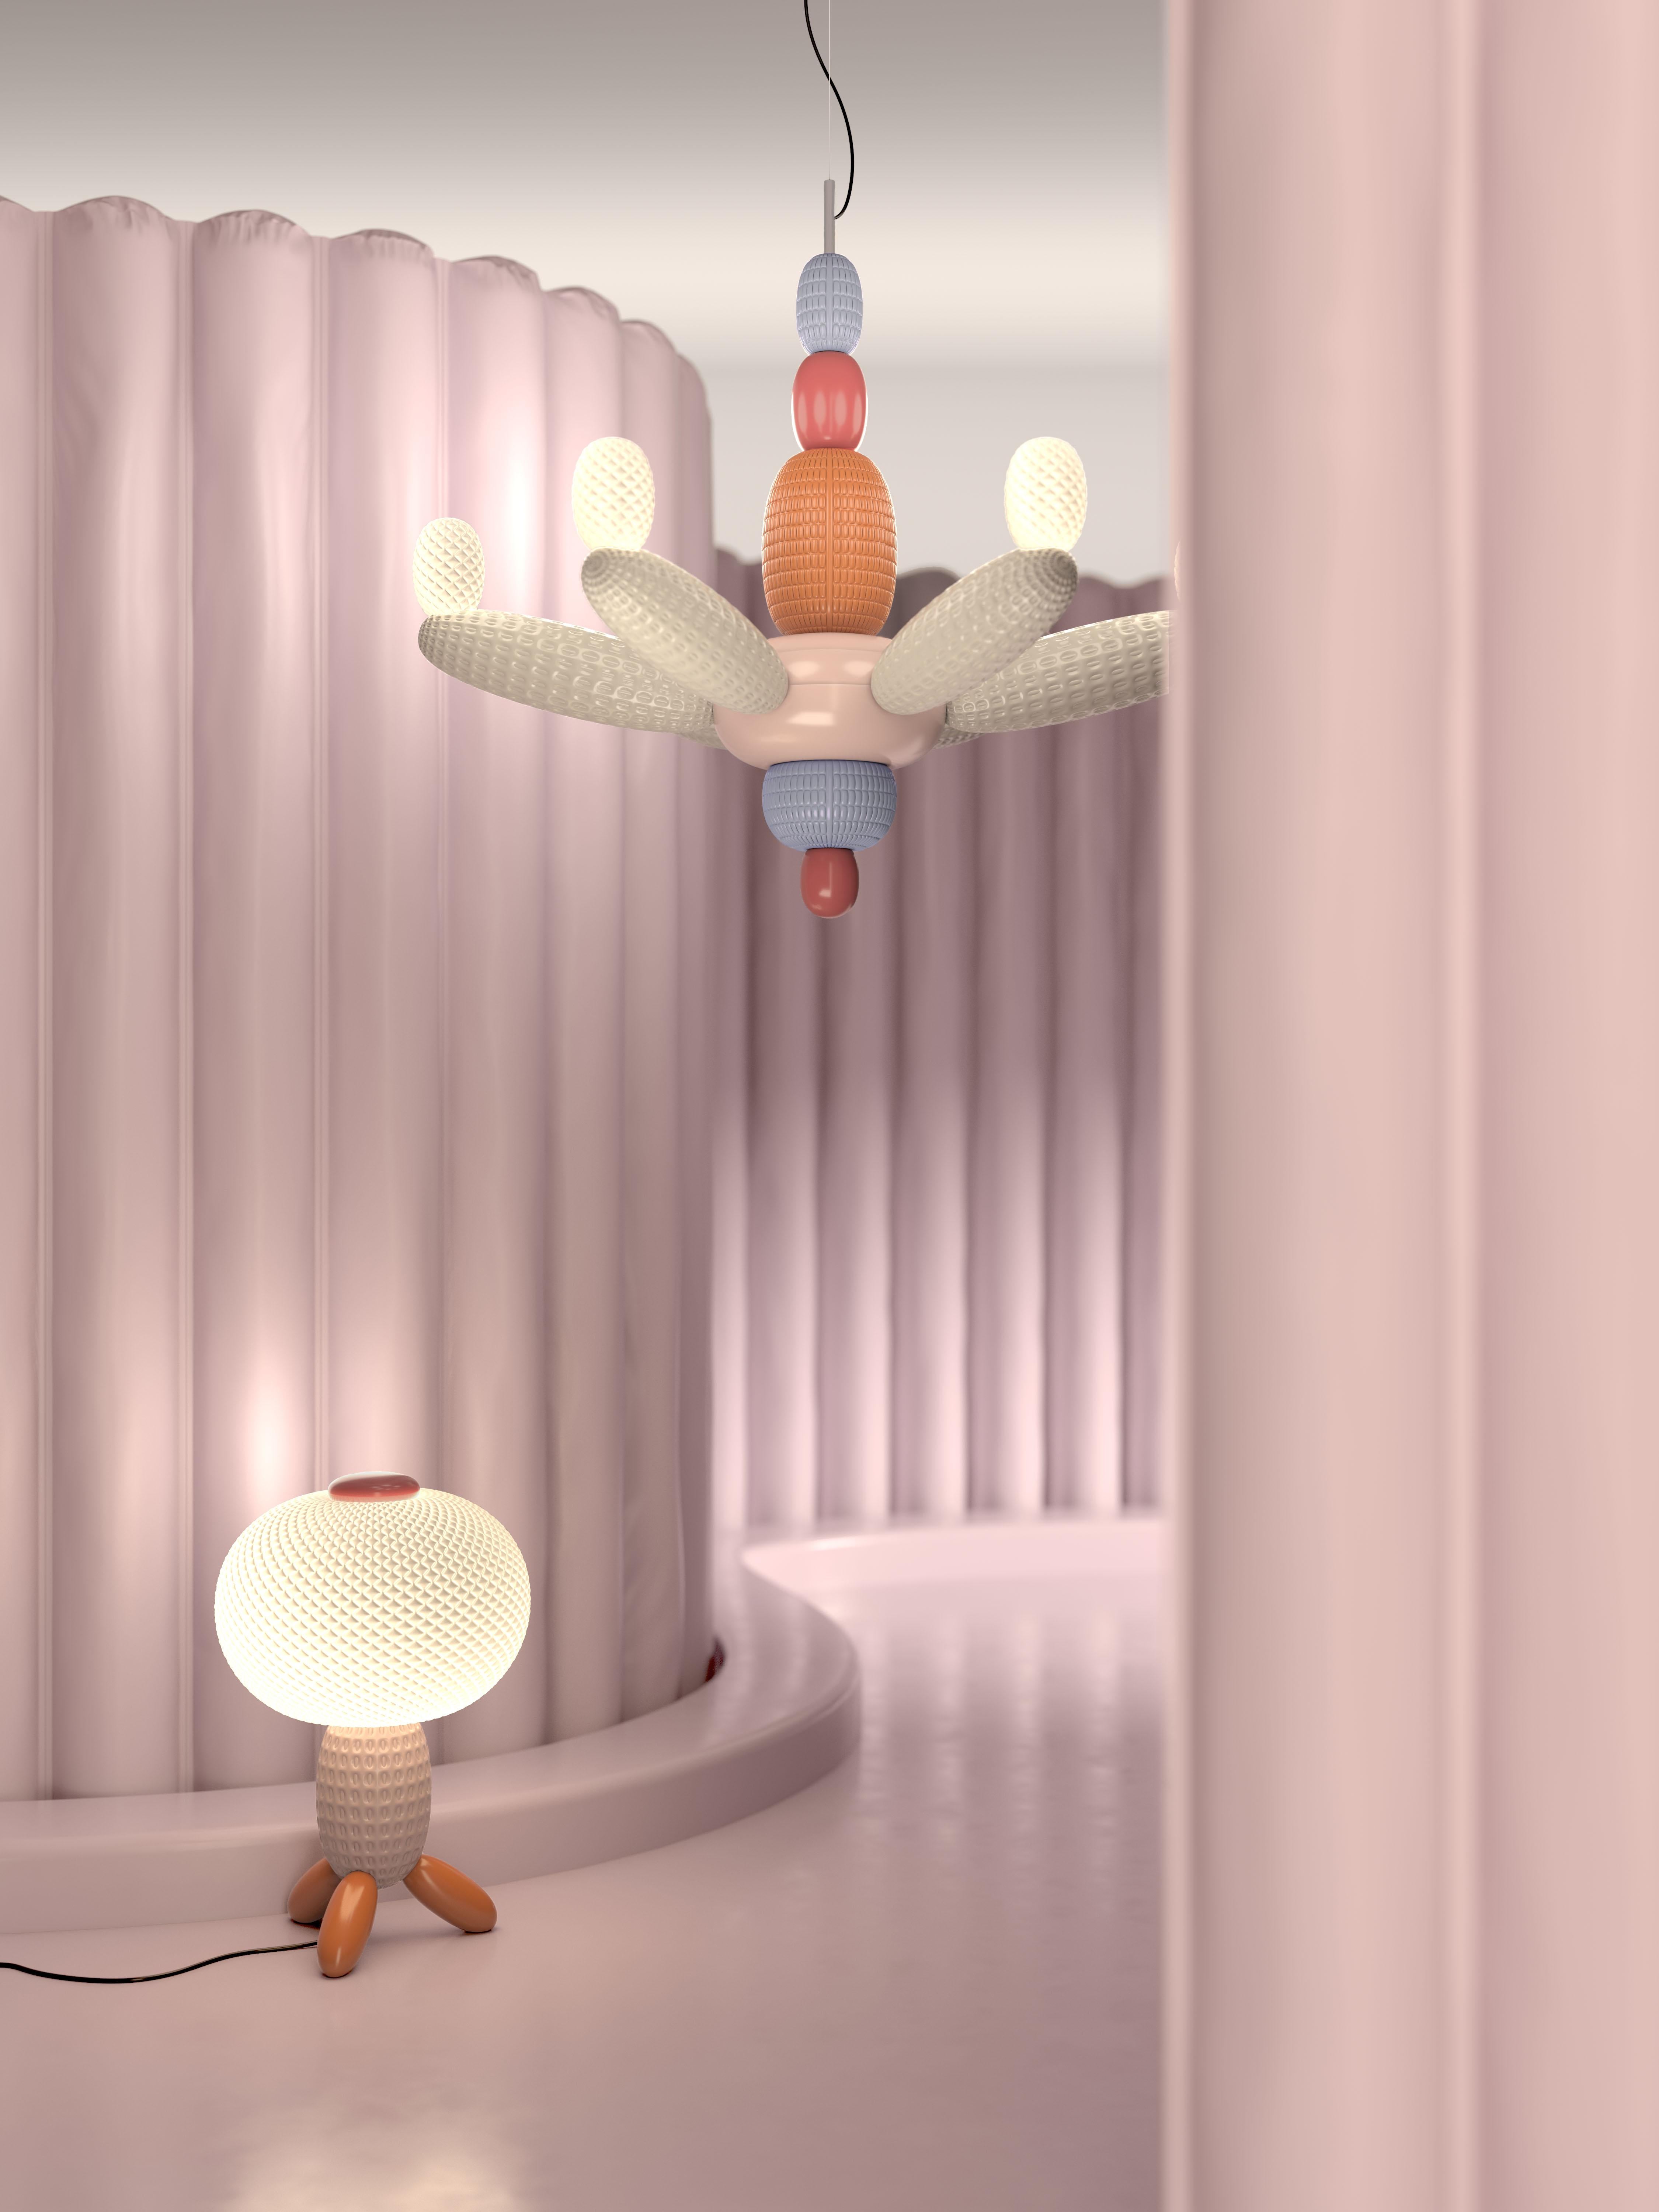 Porcelain chandelier from the Soft Blown collection, designed for Lladró by Luca Nichetto. This porcelain chandelier from the Soft Blown collection is one of the first designs made for Lladró by Nichetto Studio, the prestigious Stockholm-based